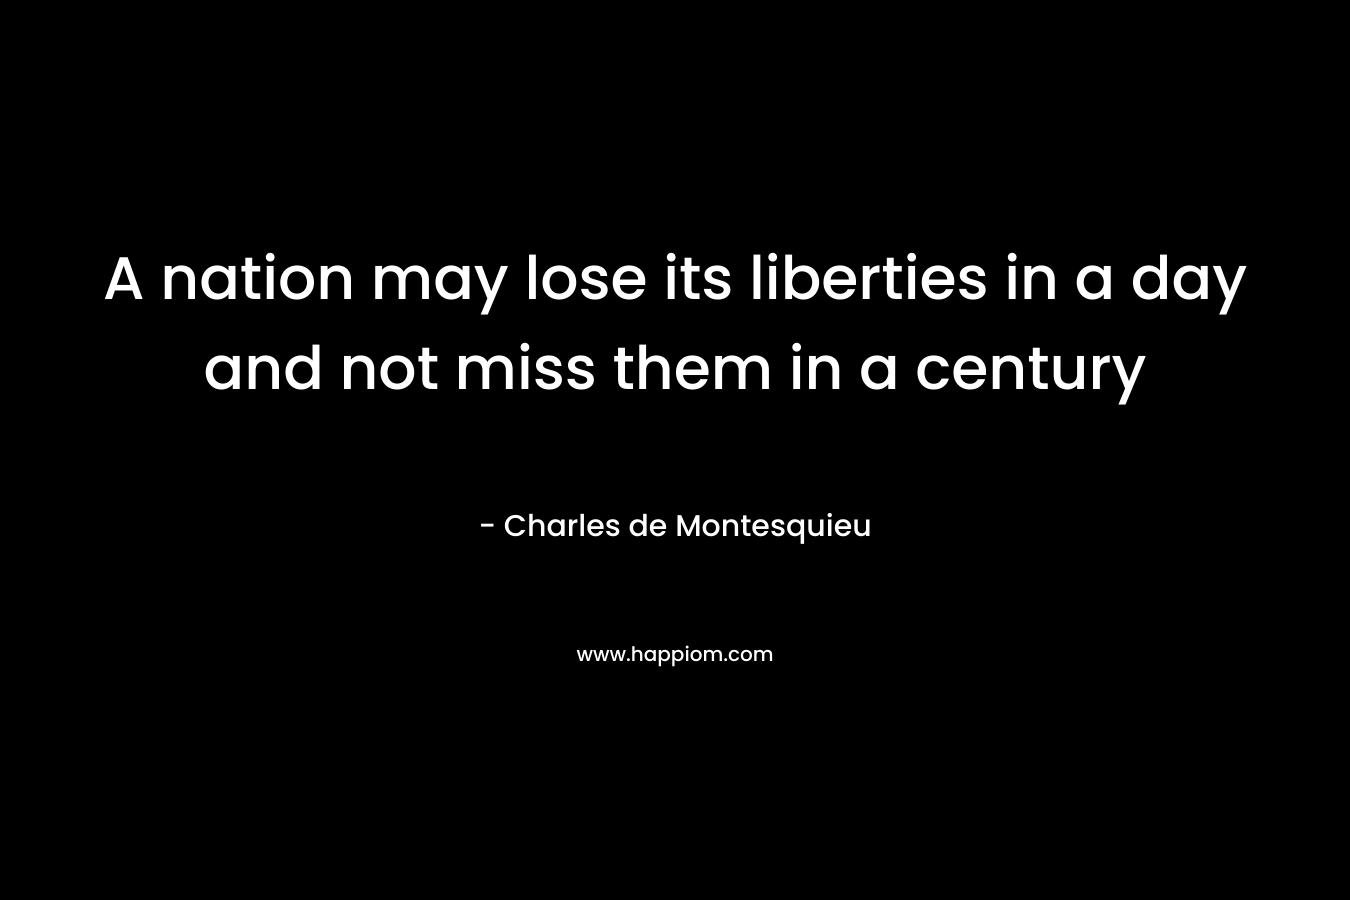 A nation may lose its liberties in a day and not miss them in a century – Charles de Montesquieu